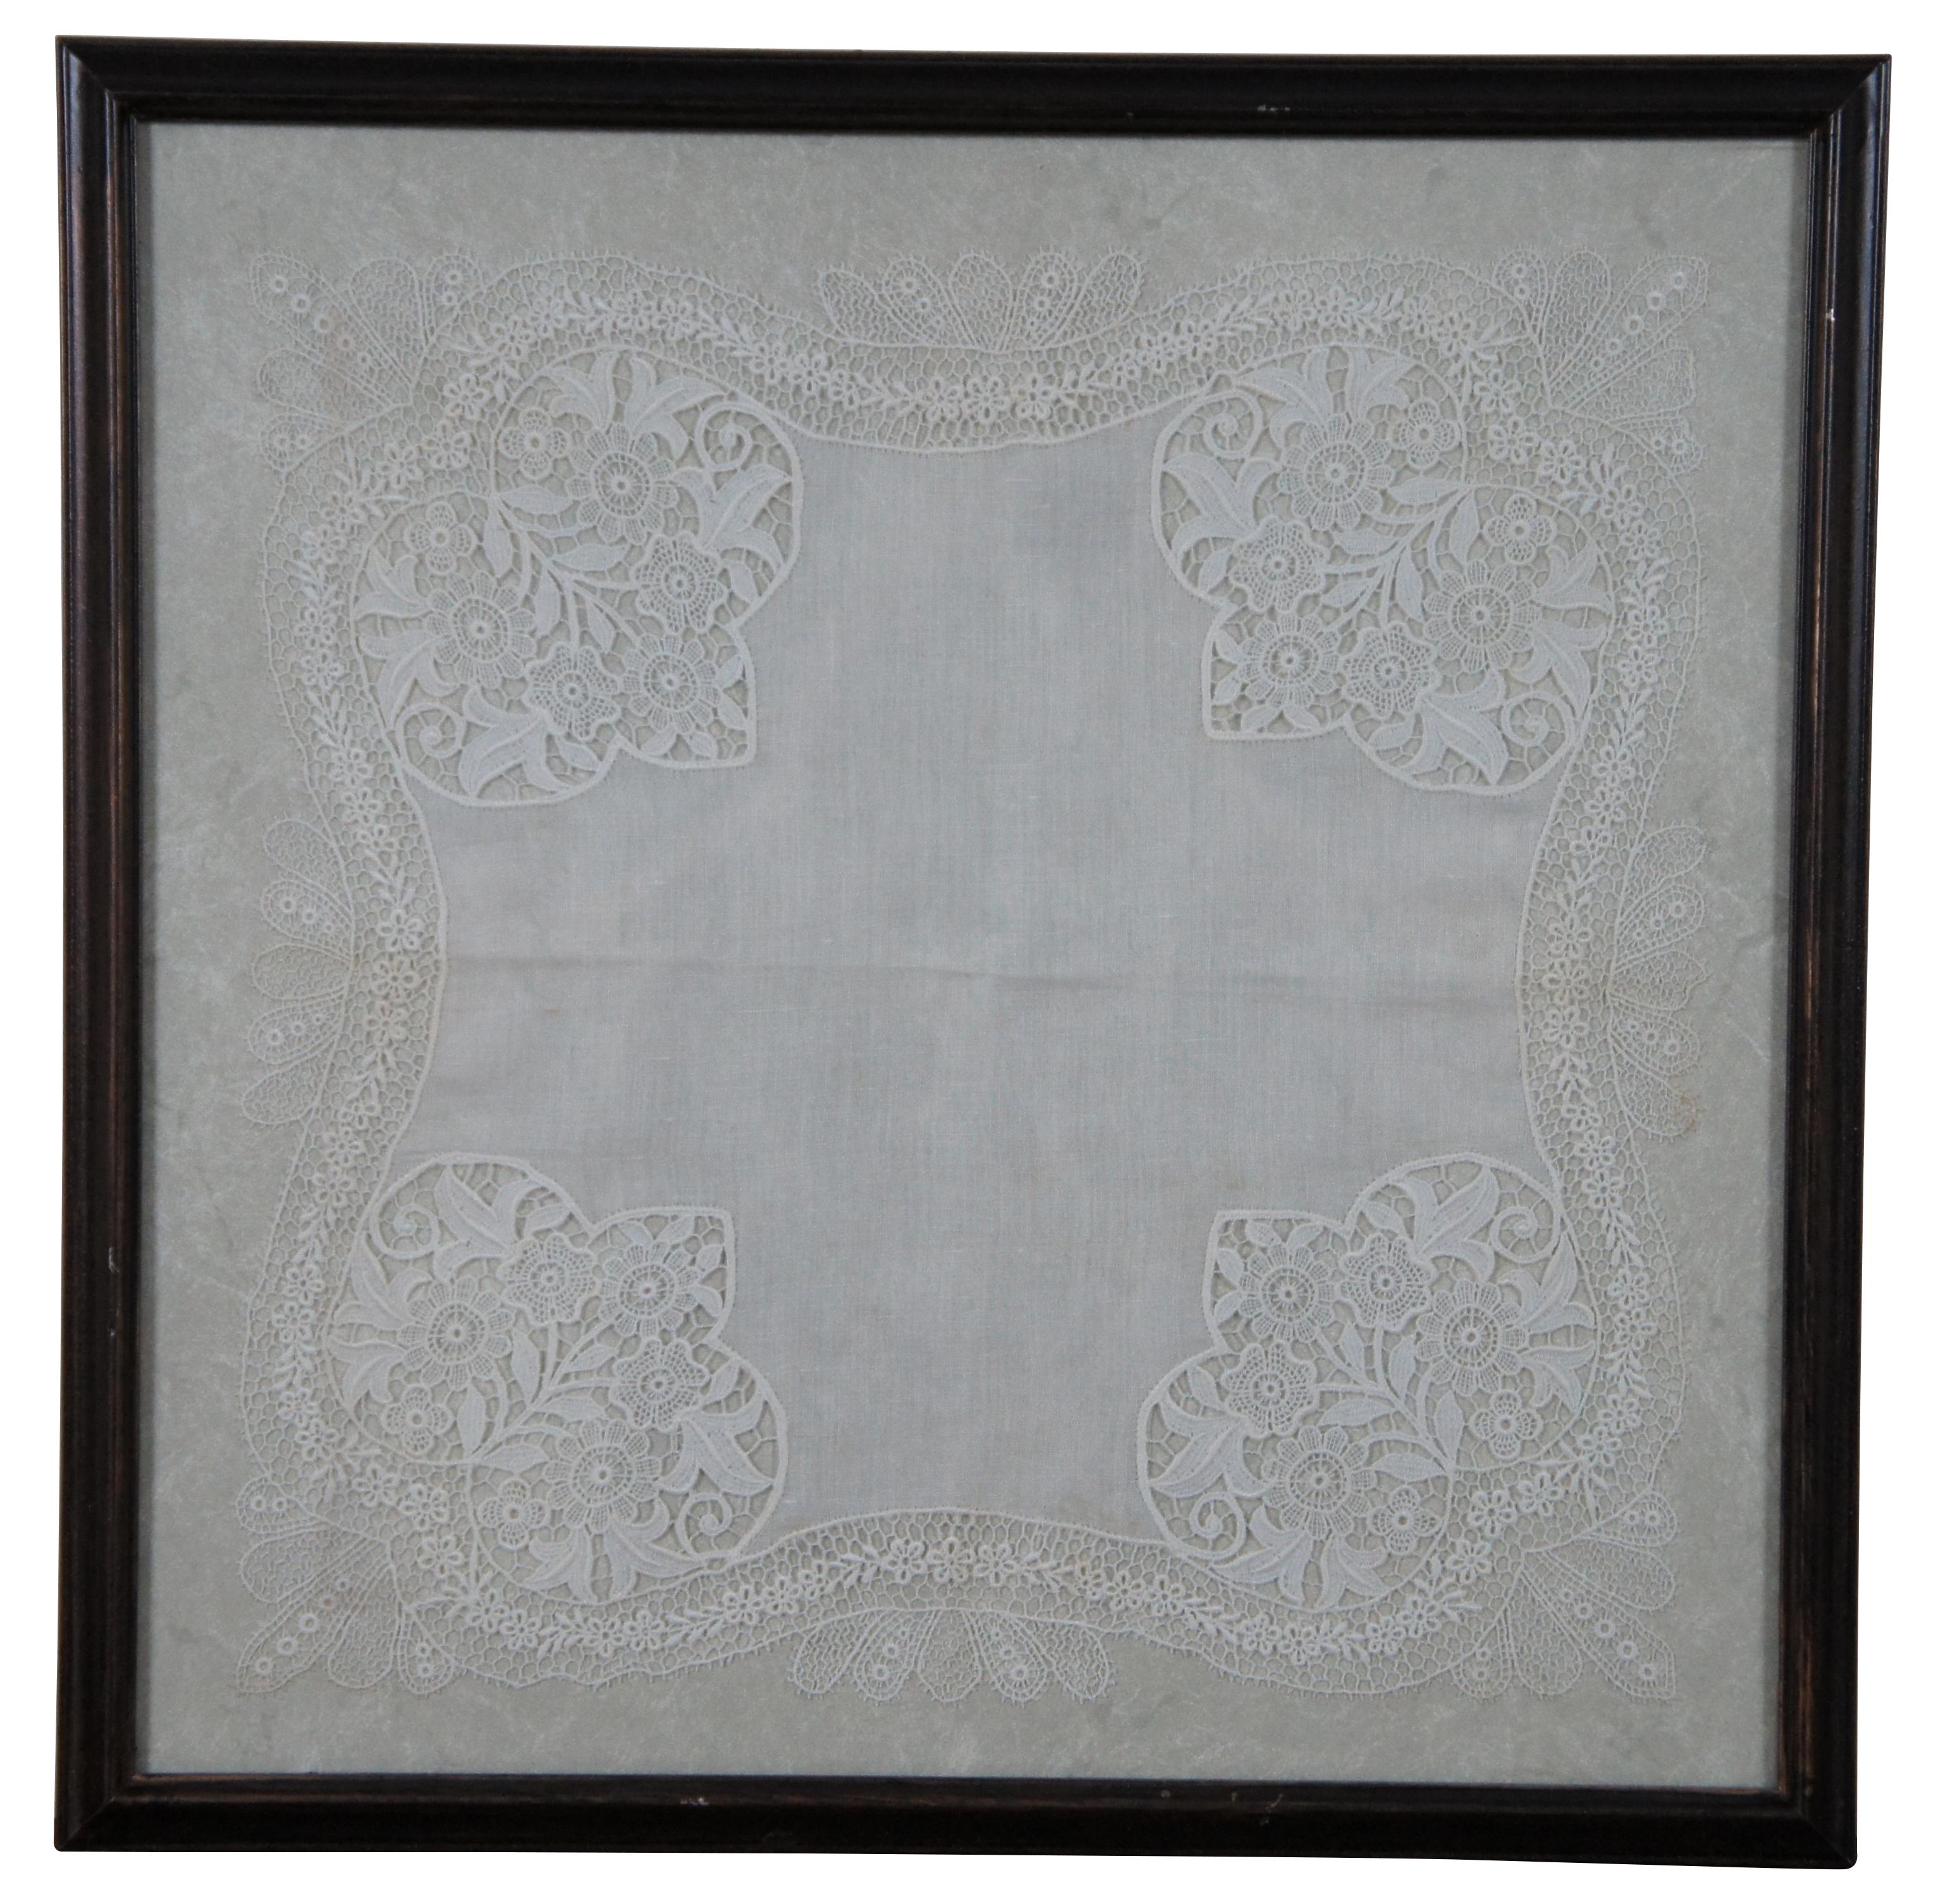 Set of three framed floral intricately embroidered and lace handkerchiefs.

Measures: 14” x 0.75” x 14” / Sans Frame - 11” x 11” (Width x Depth x Height).